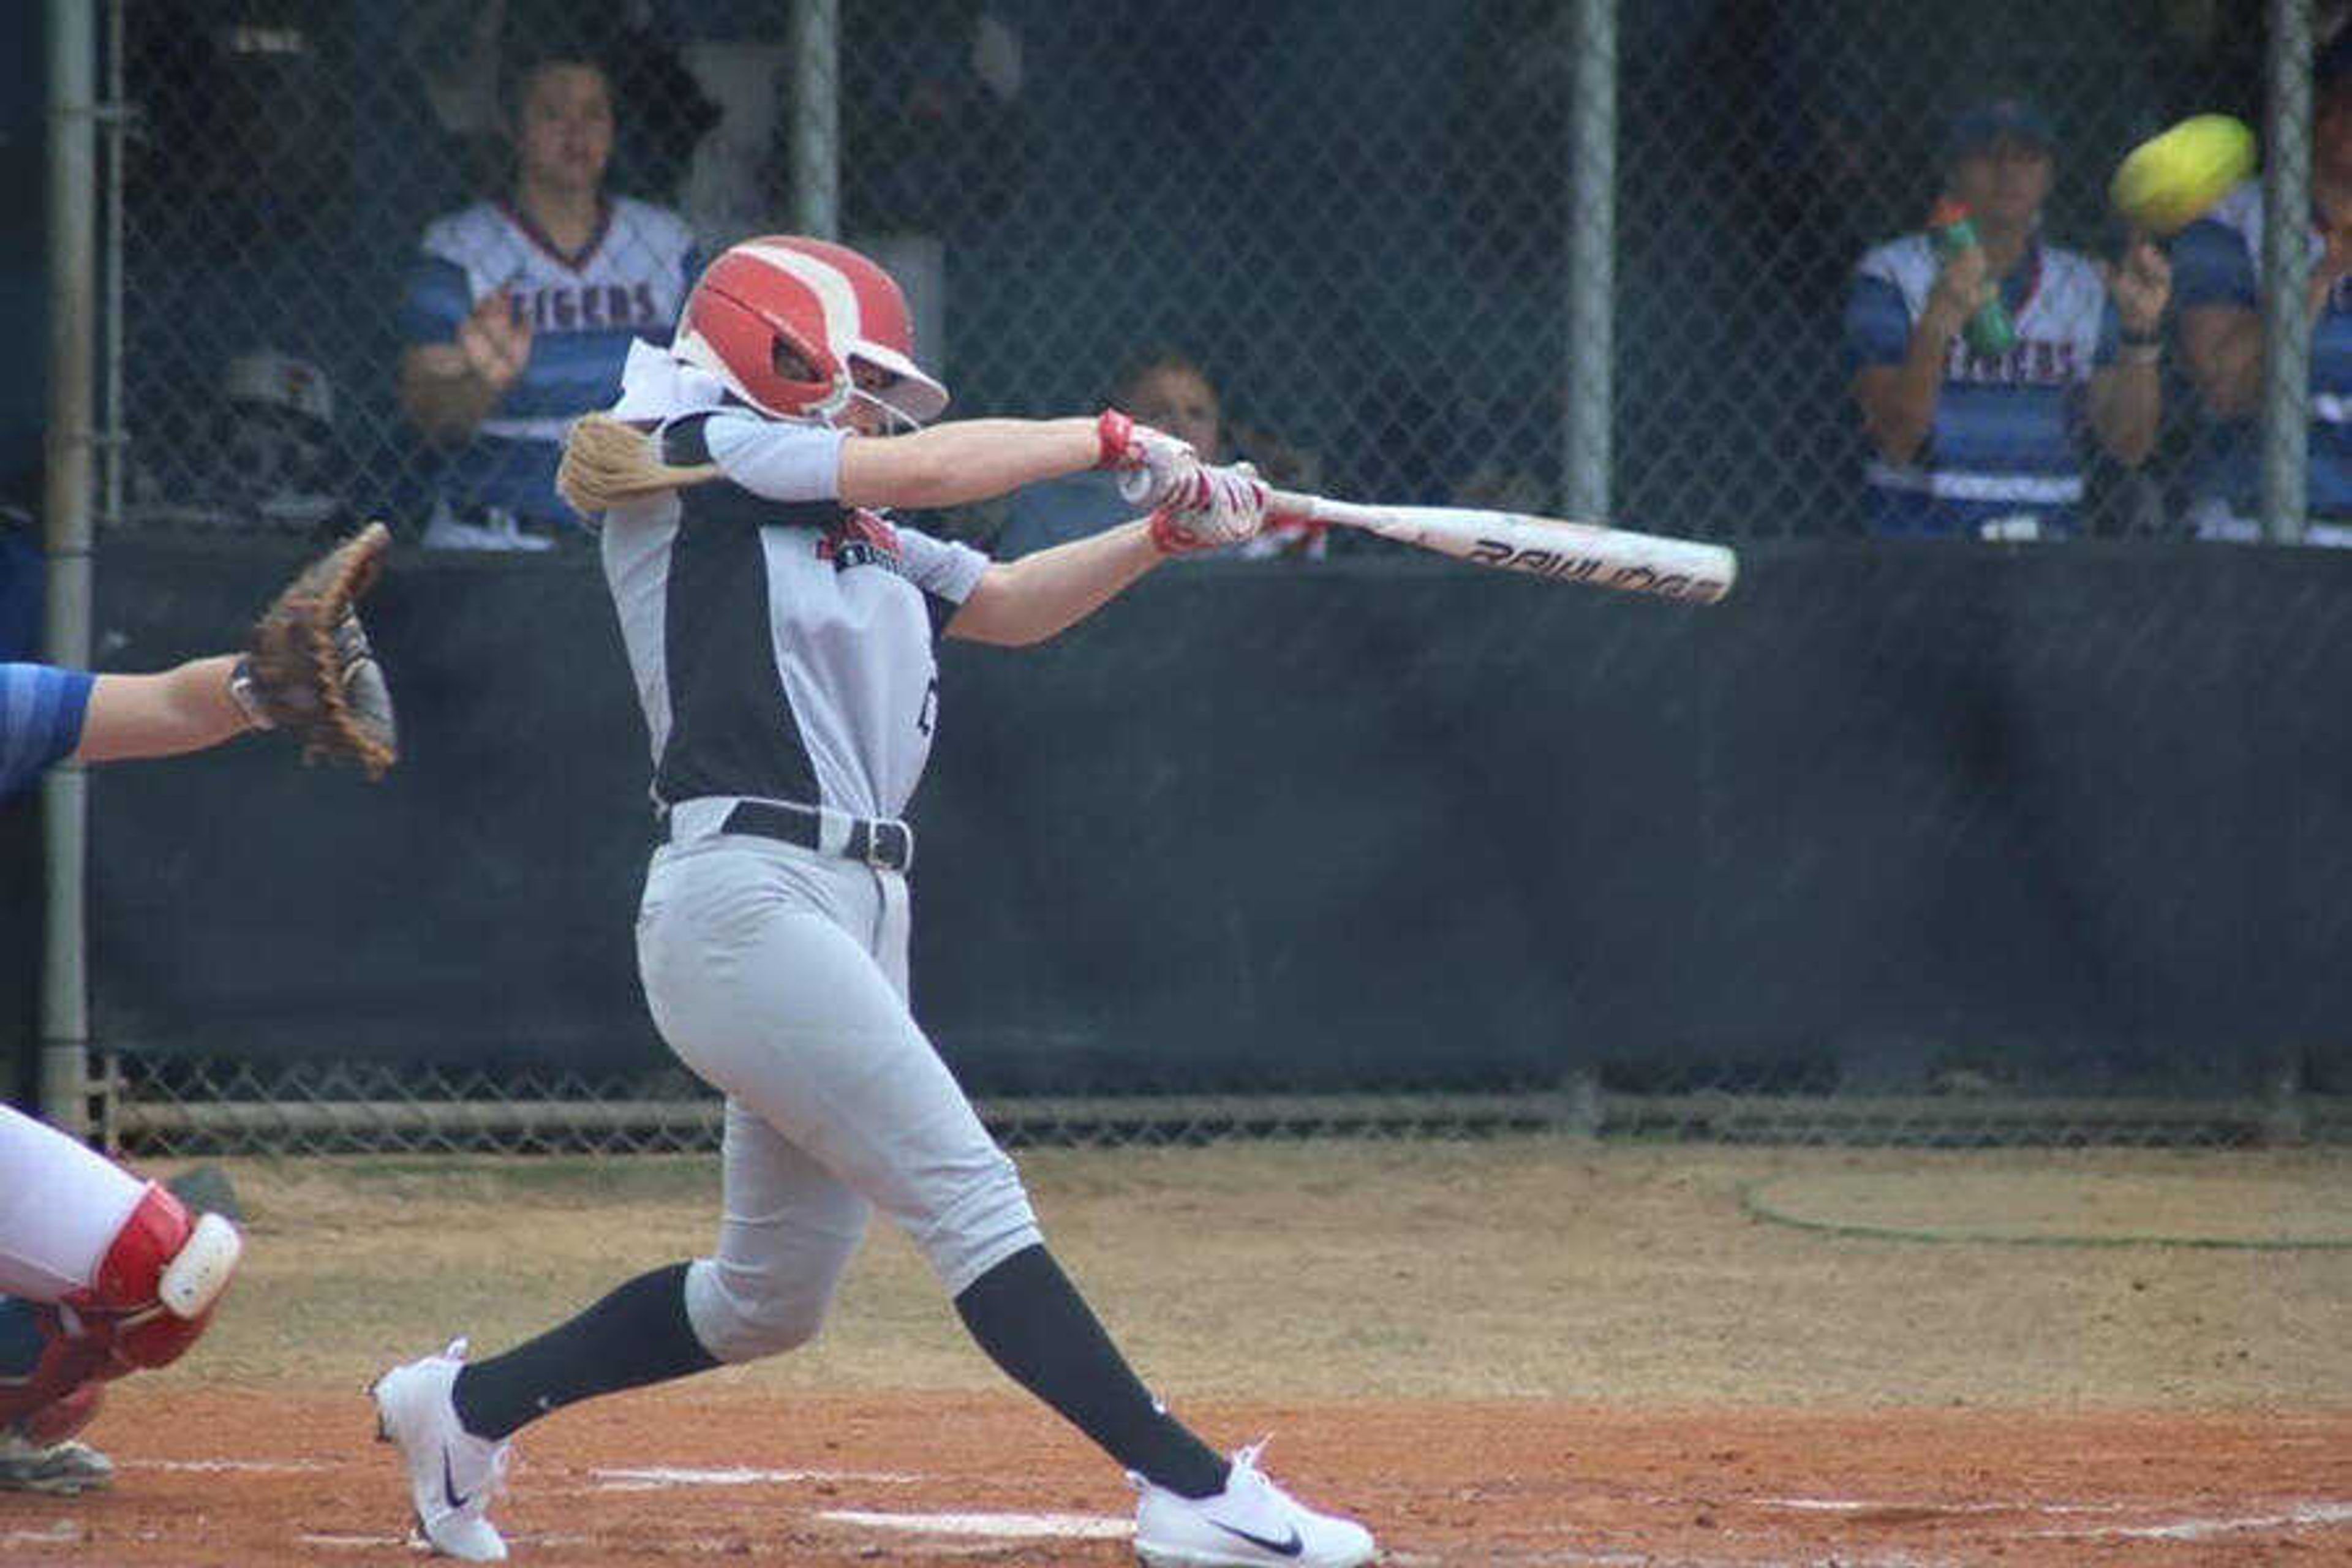 Southeast senior center fielder, Rachel Anderson hitting the home run in her first collegiate at bat in 2017, giving the Redhawks a 2-0 lead. This home run started her journey to being in the top five of career home runs.